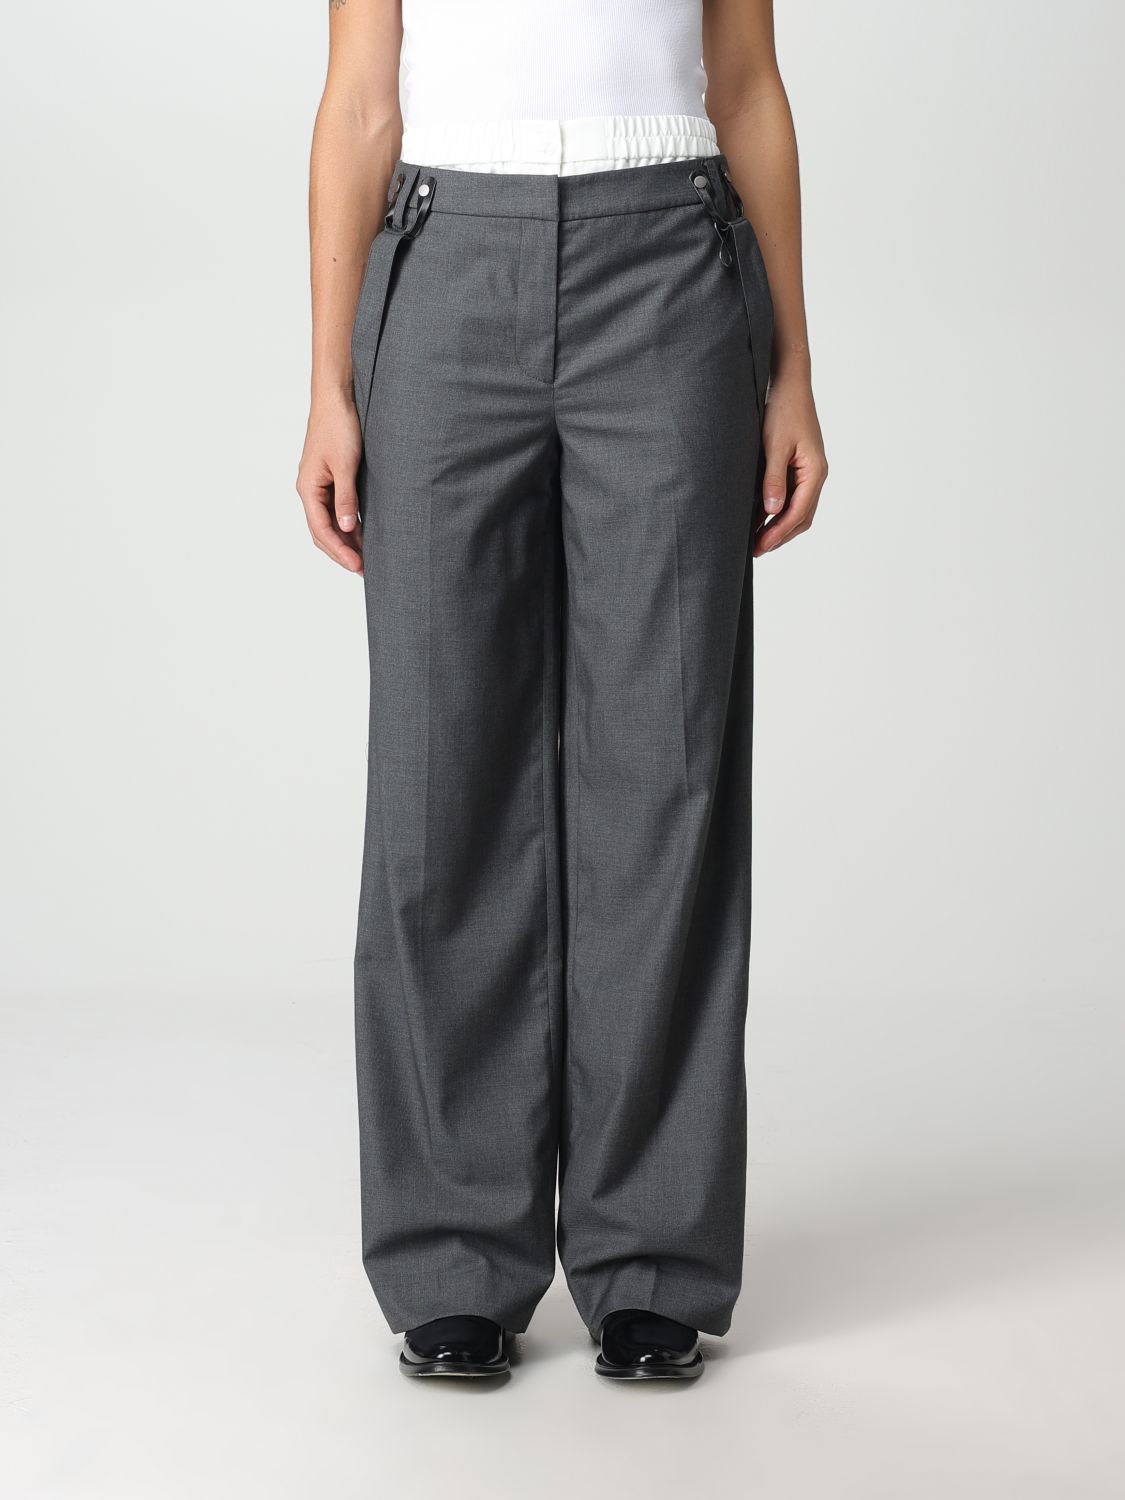 Remain Trousers REMAIN Woman colour Grey